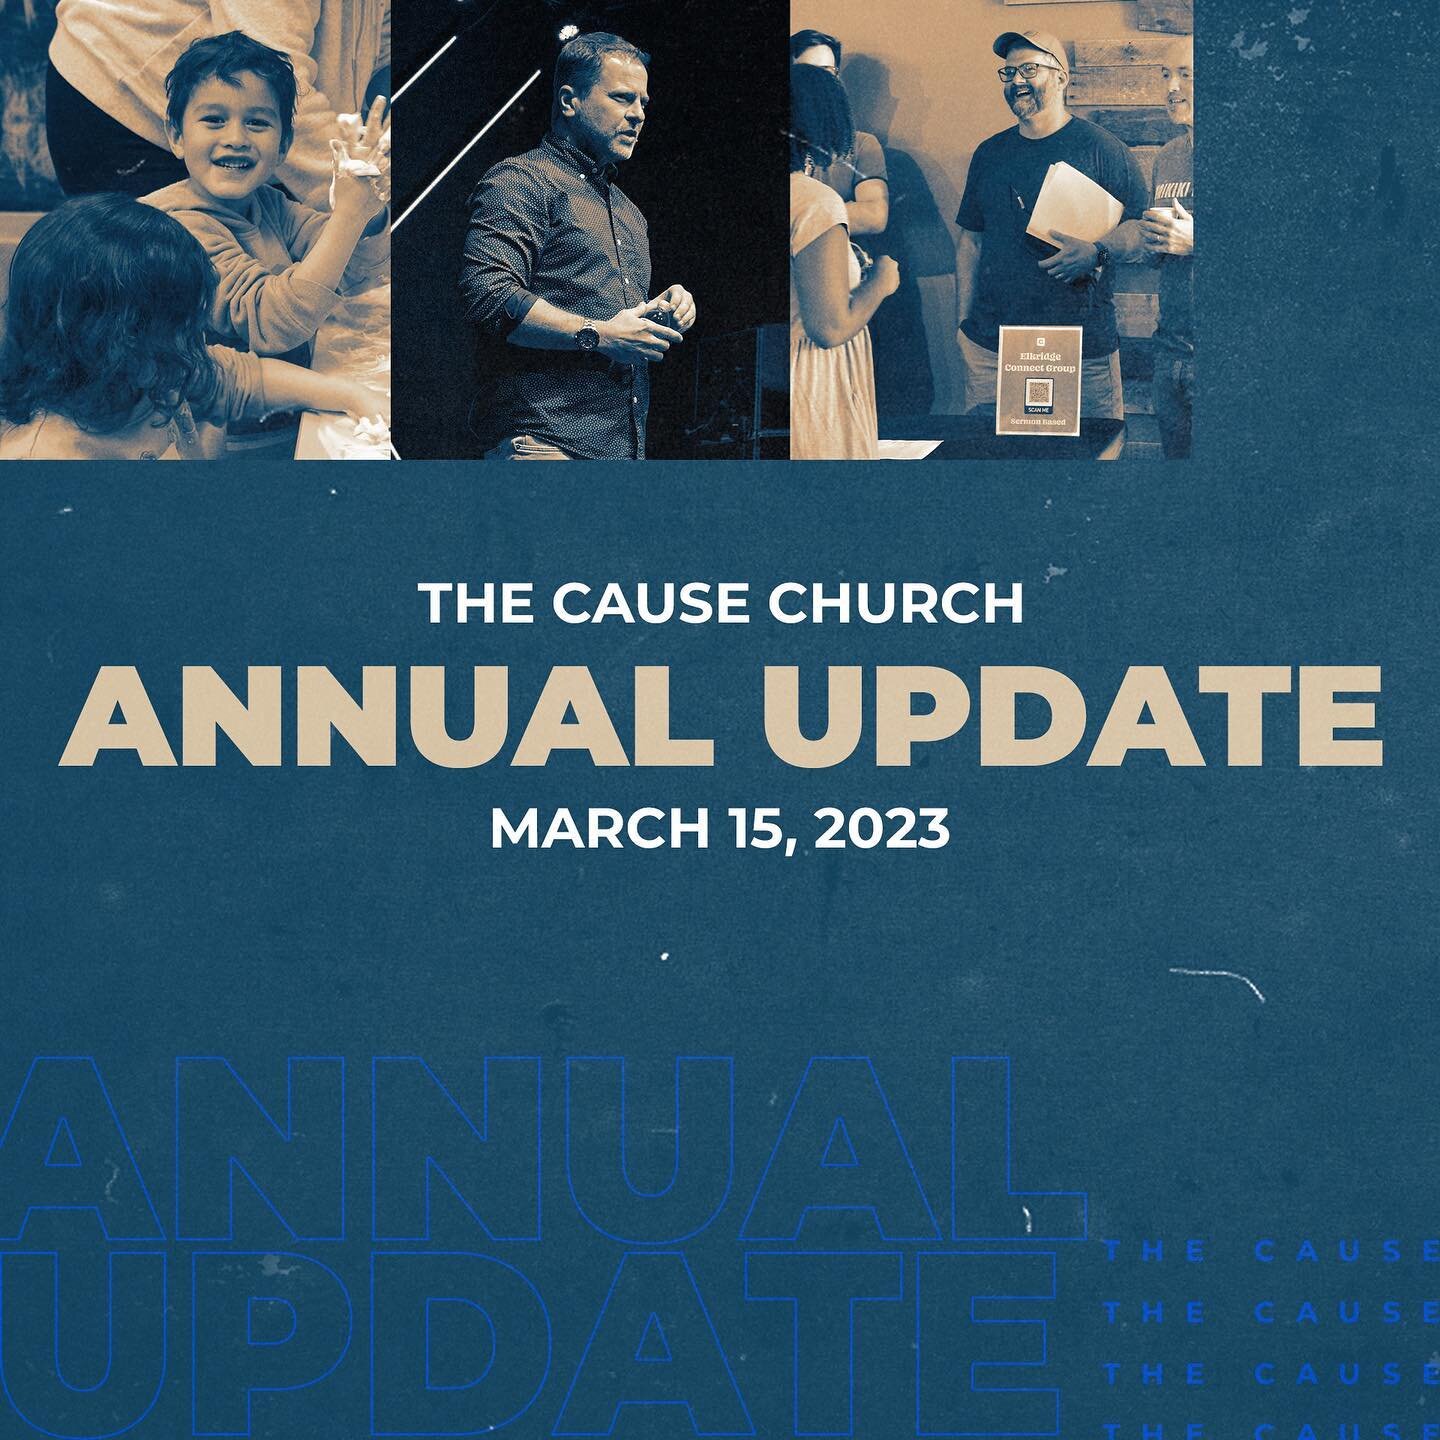 Tomorrow at 7pm is our Annual Update. This is our state of the church meeting where we go over the past year and plans for the future of the church. Anyone is welcome to come but only members are allowed to vote in applicable areas. Come see the visi